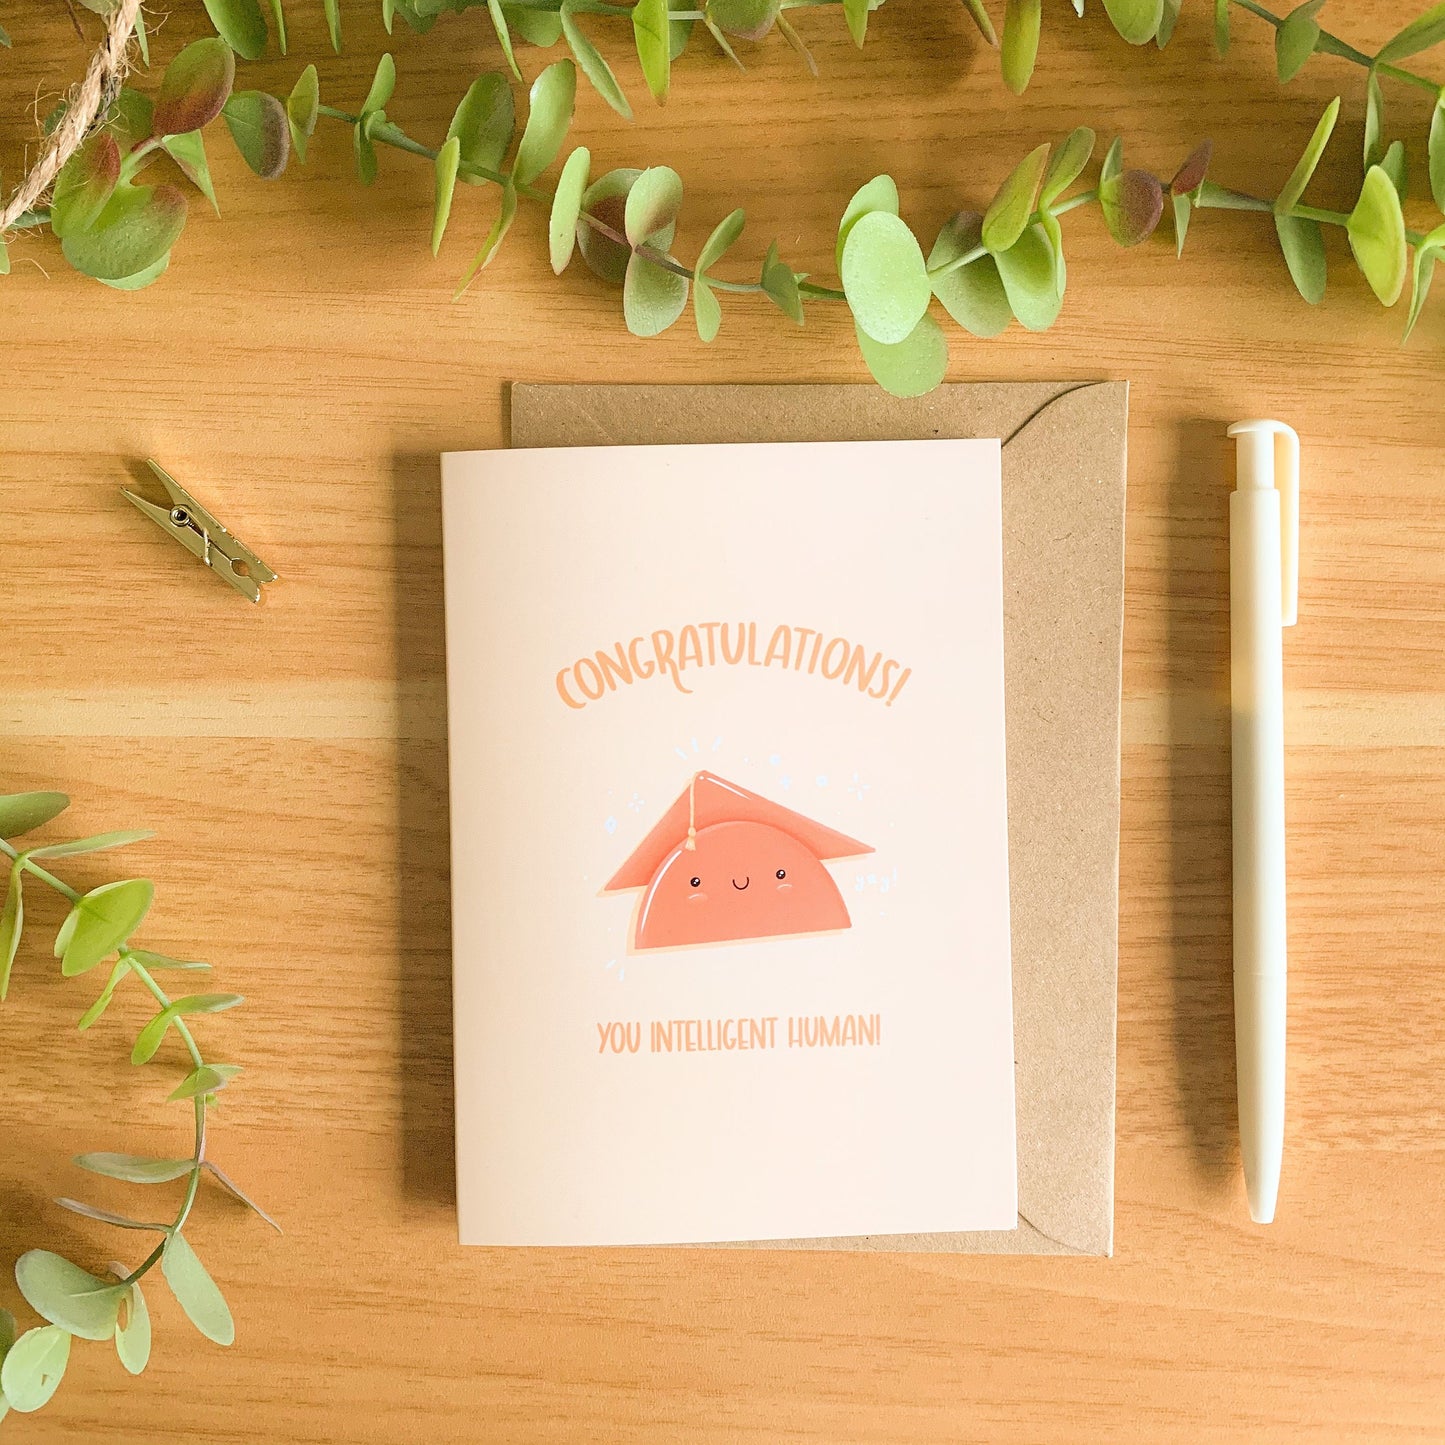 Congratulations you Intelligent Human! - Cute Illustrated Greetings Card